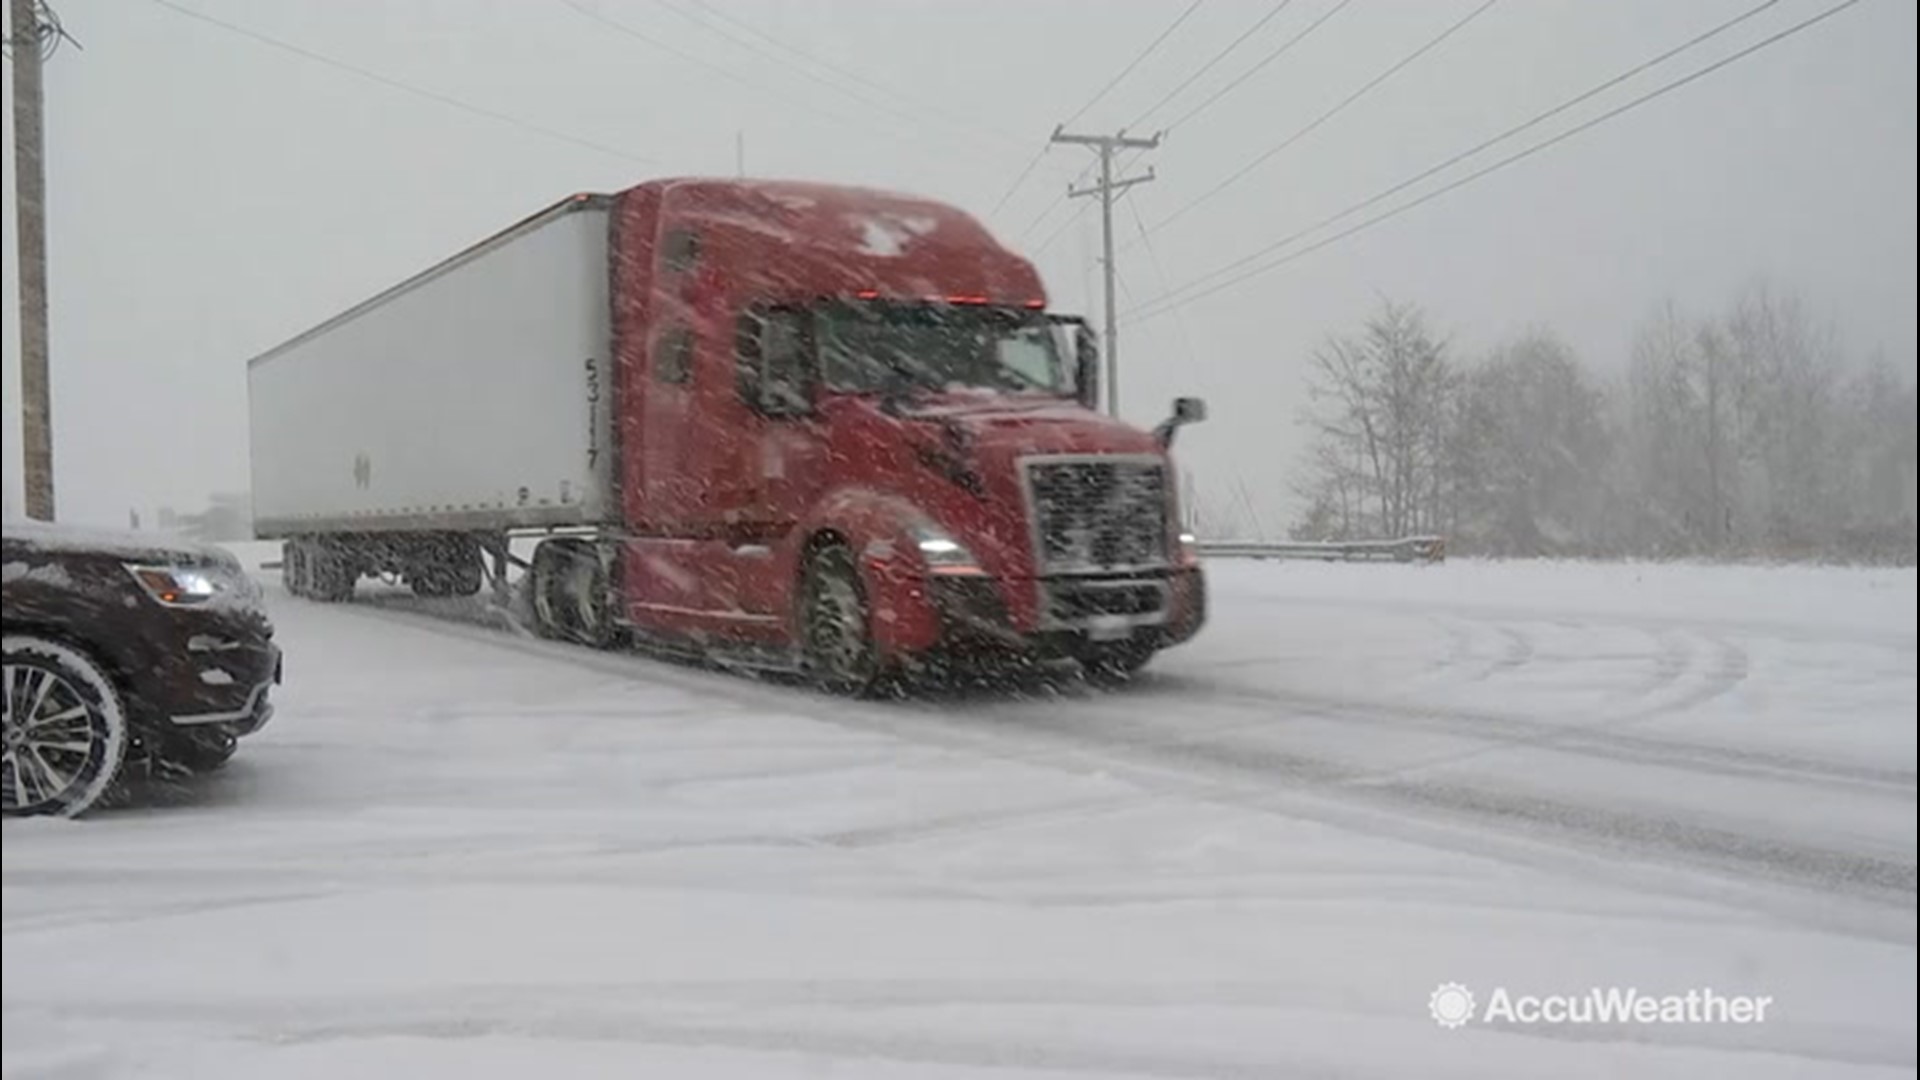 This footage from Mattawan and Kalamazoo, Michigan, shows the conditions resulting from moderate to heavy, lake-effect snow that hit the area on Tuesday, Dec. 10.